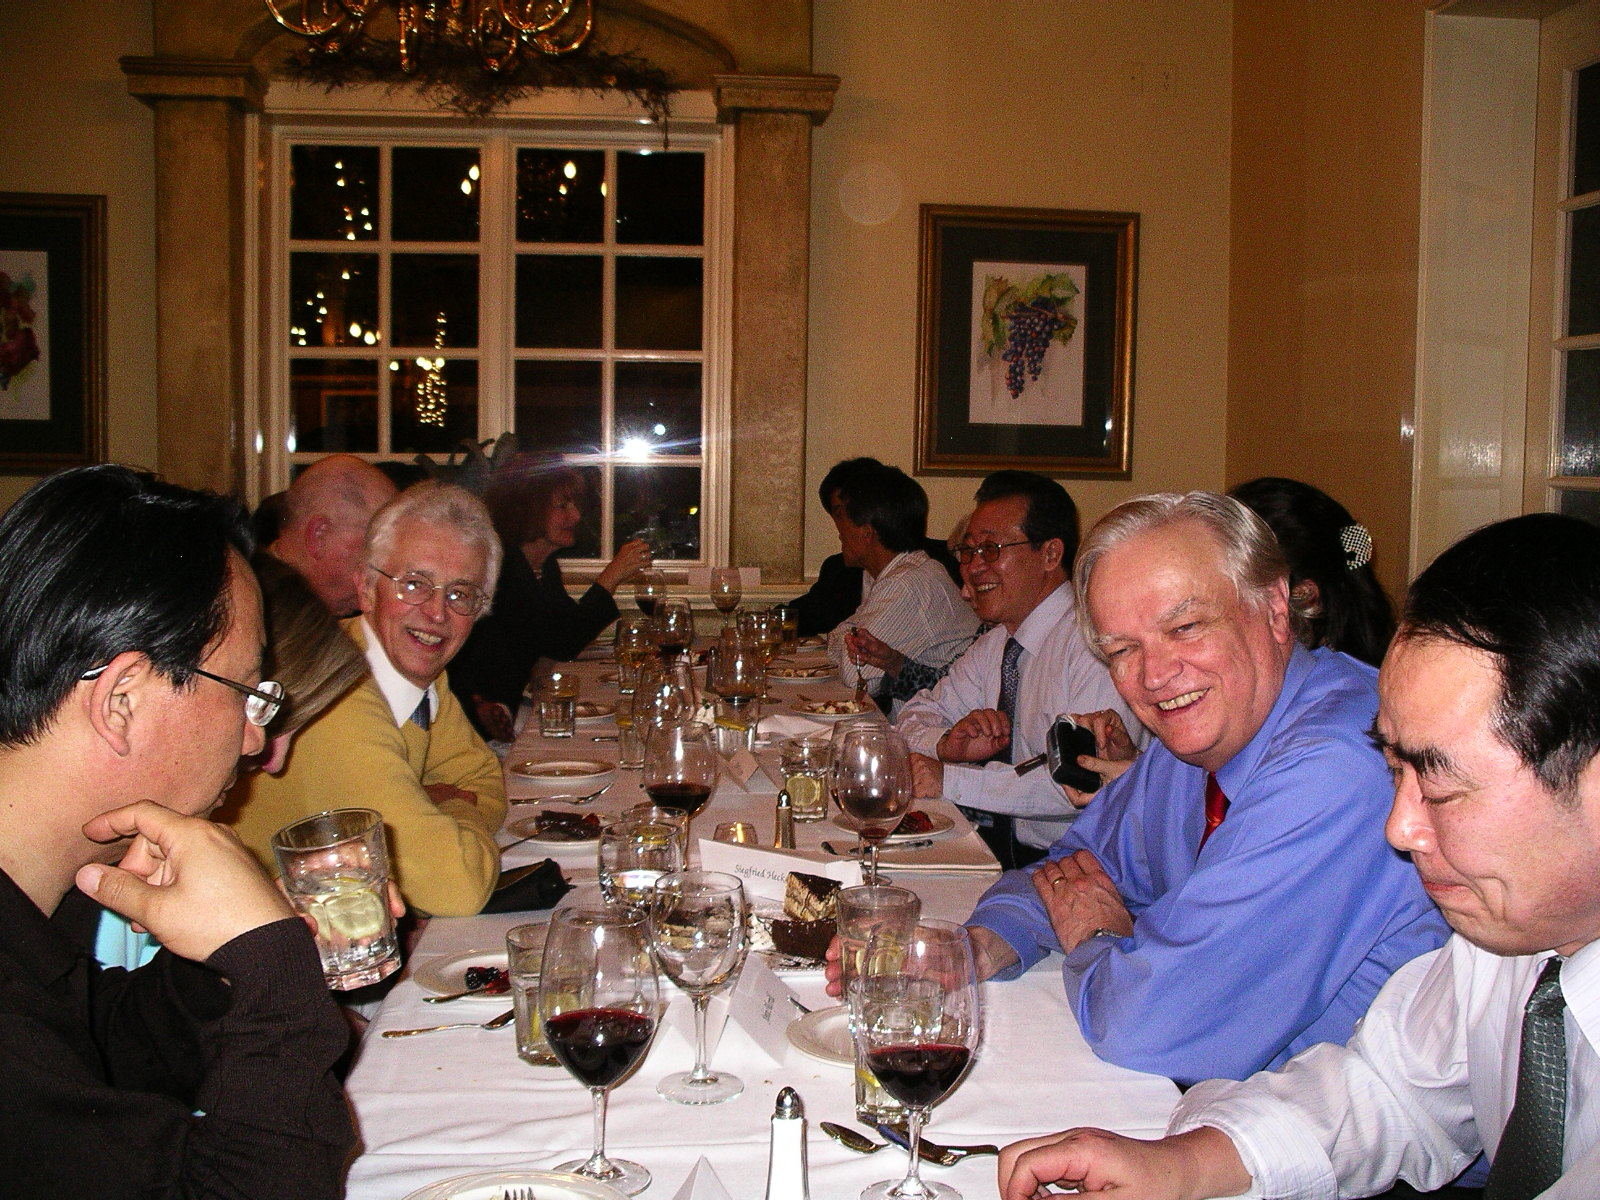 Company of smiling relaxed people with wine glasses at a restaurant table